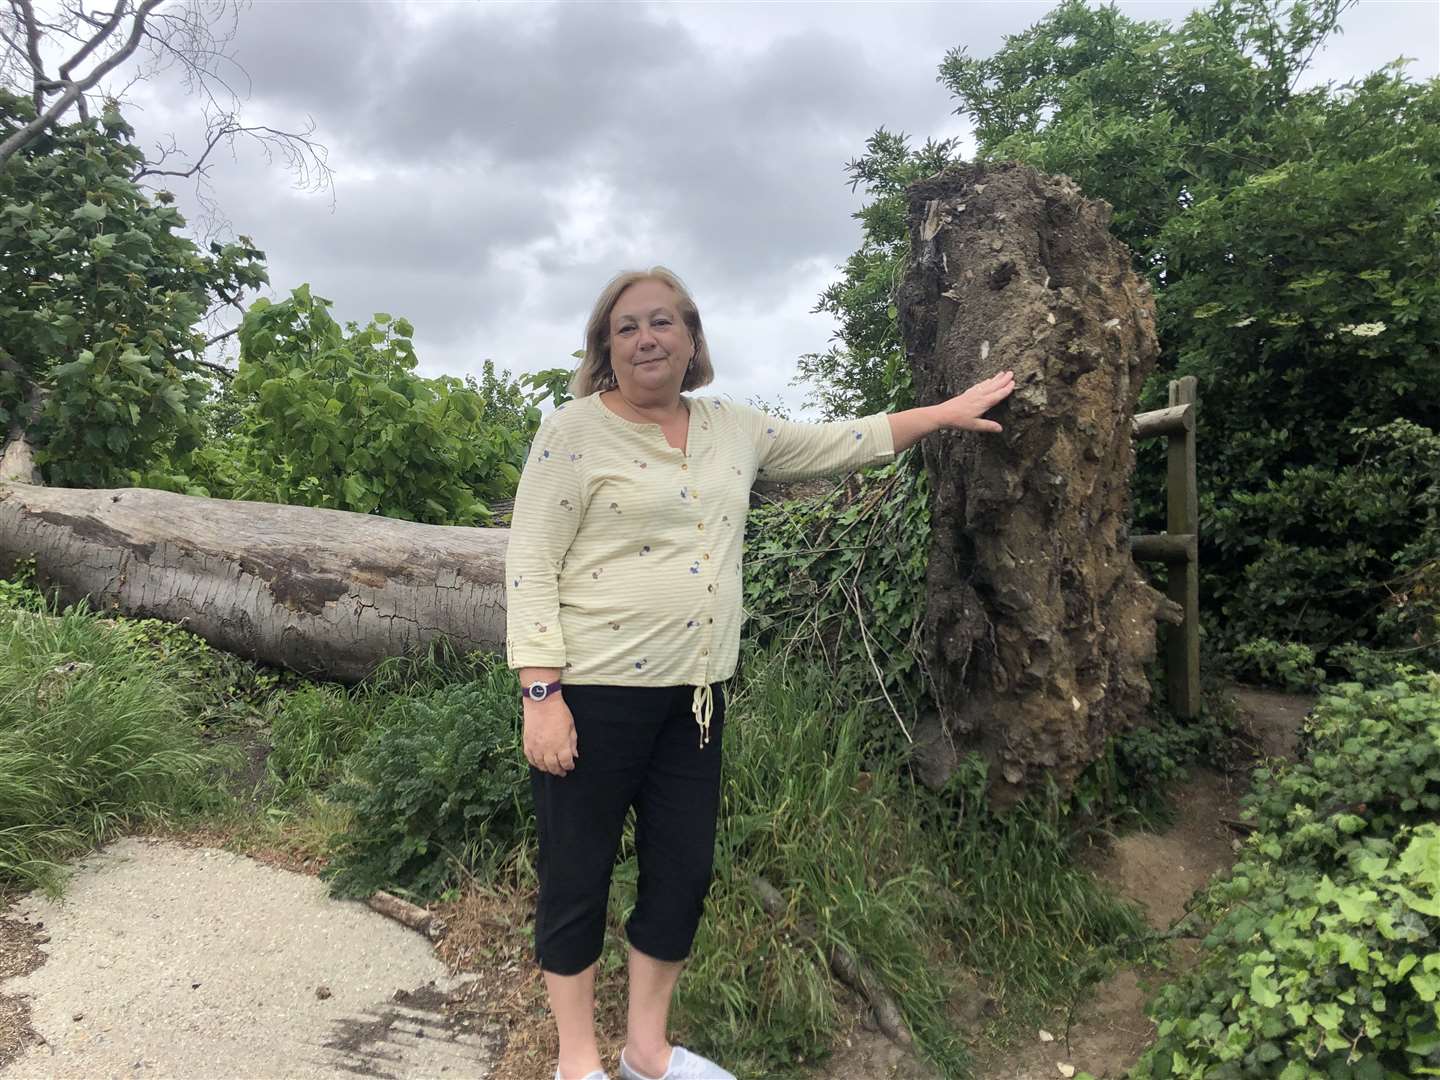 Resident Sharon Vasudaven said she was used to the tree now